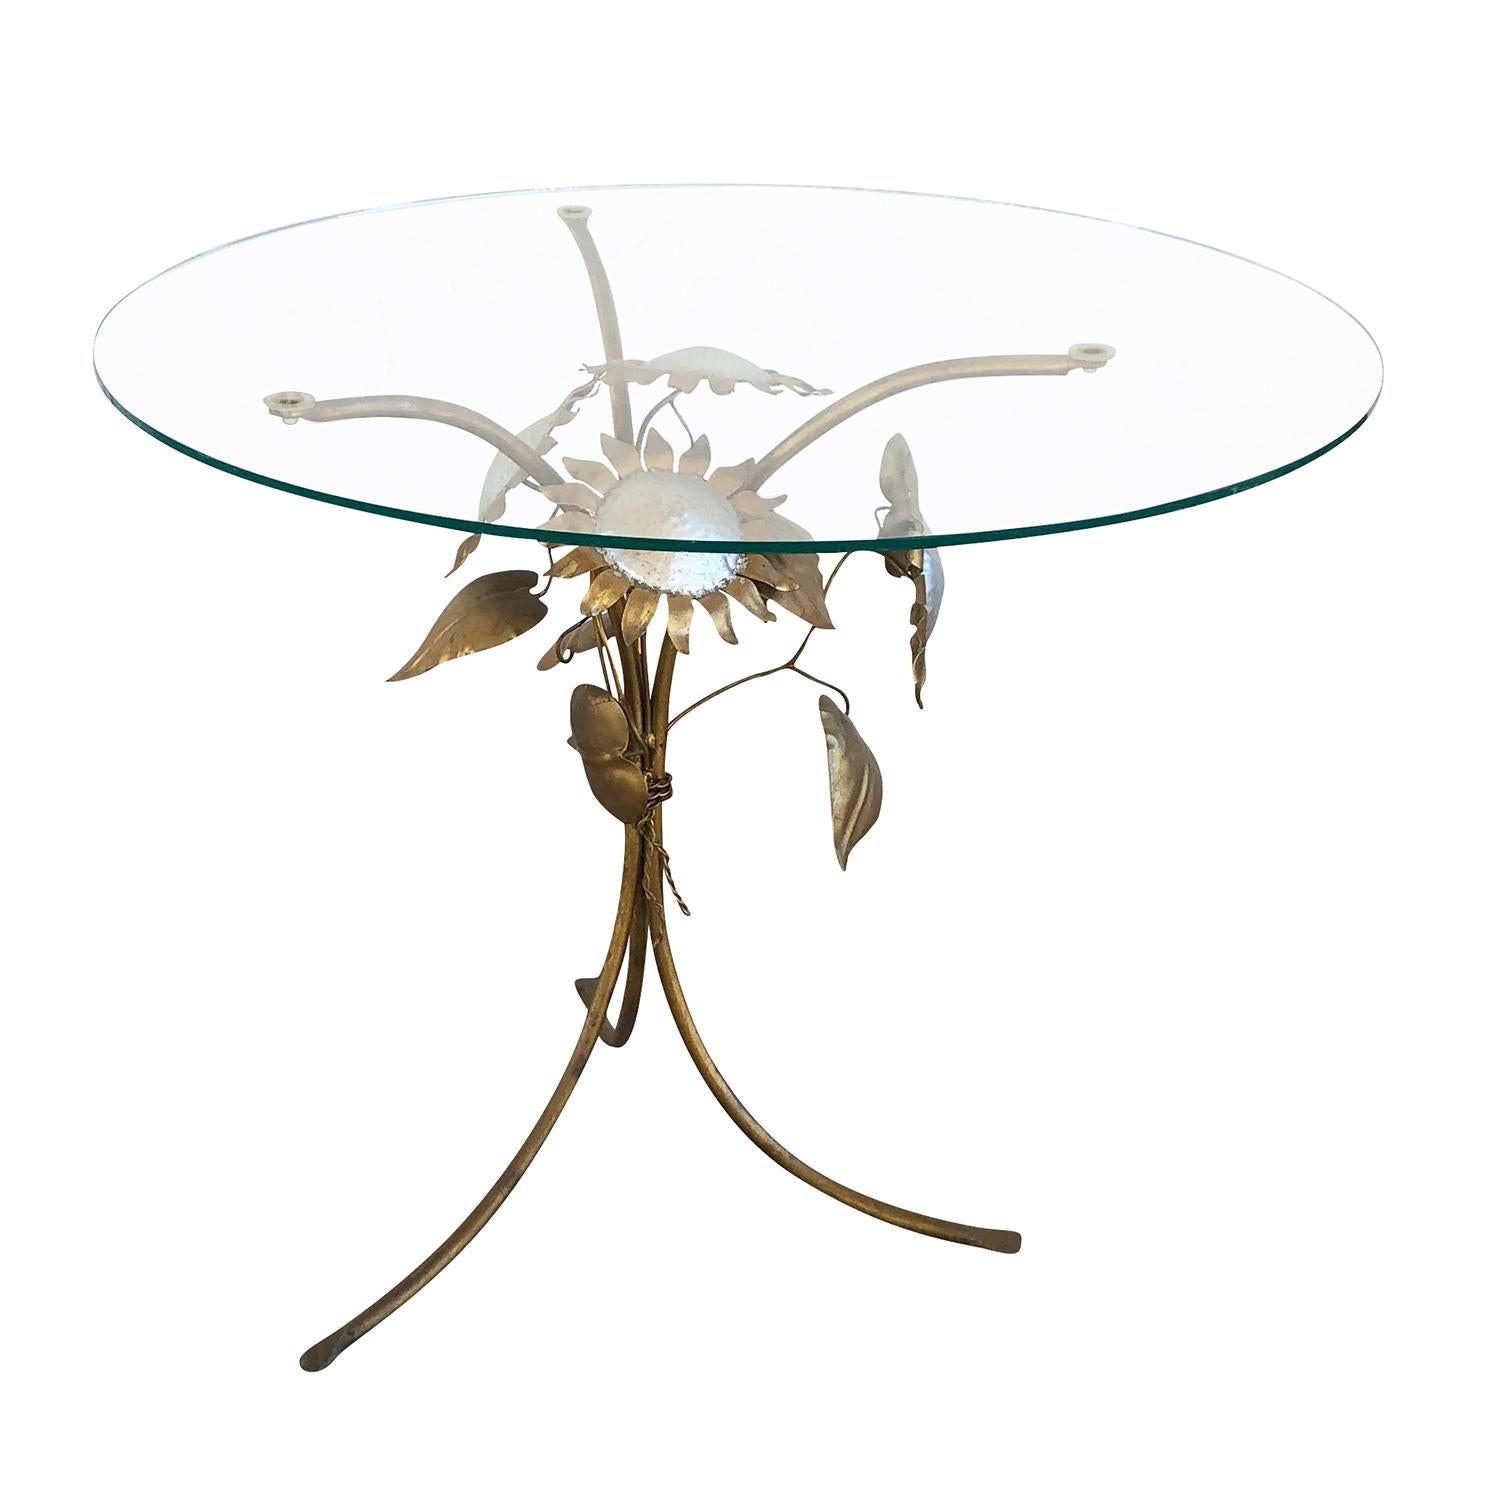 Hand-Crafted 20th Century Gold European Brass Sunflower Side Table, Vintage Glass Sofa Table For Sale